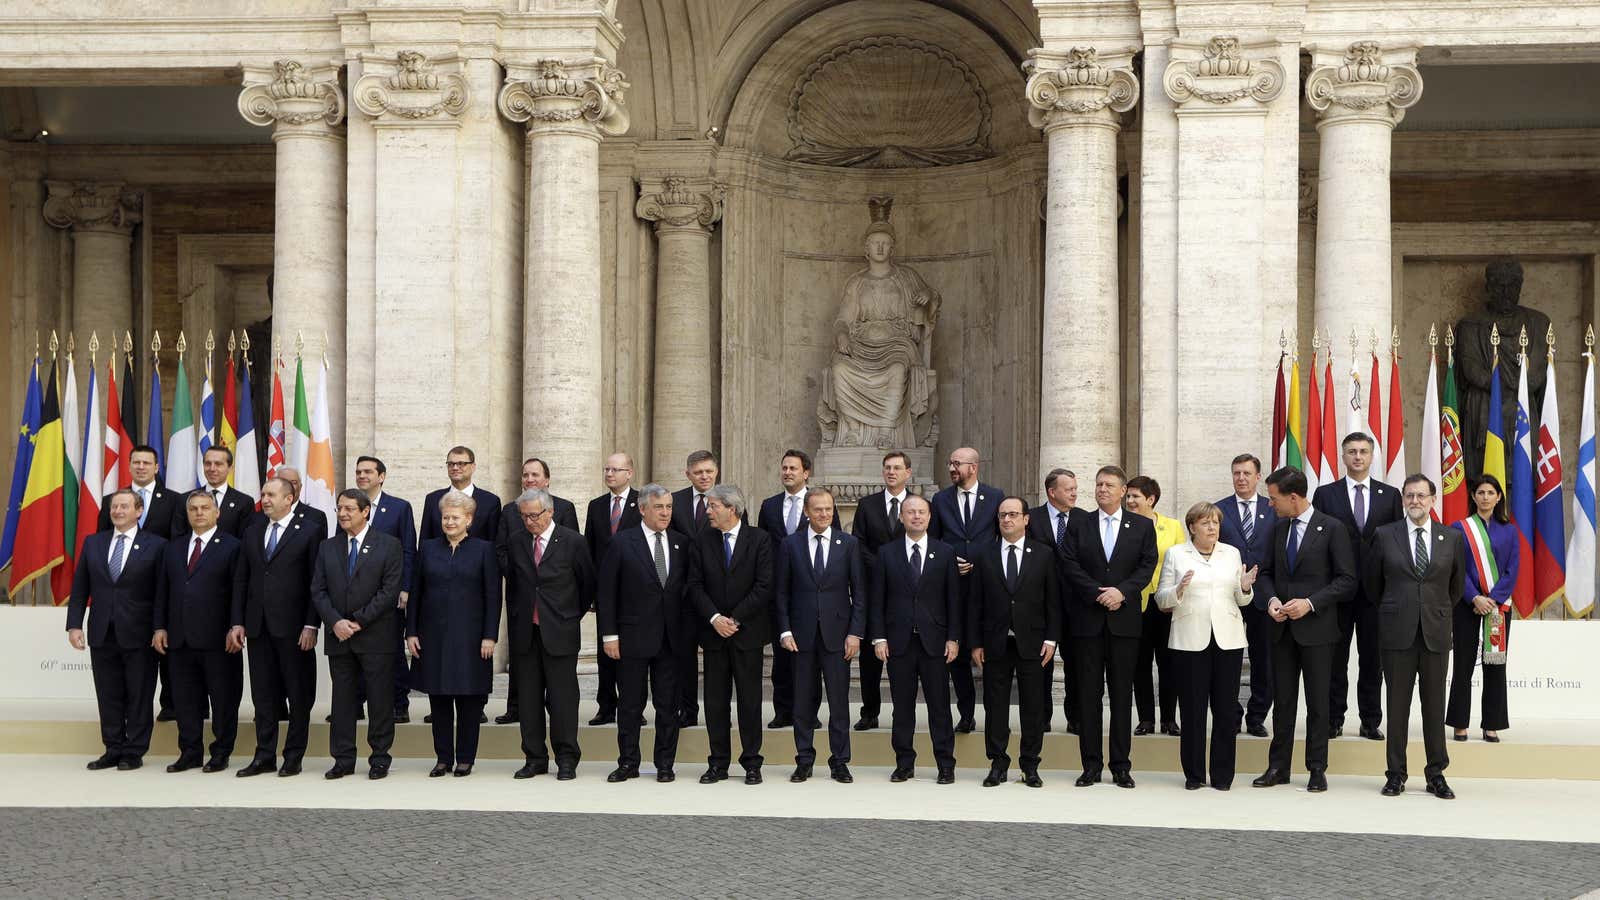 The EU’s leaders aren’t exactly a diverse group.